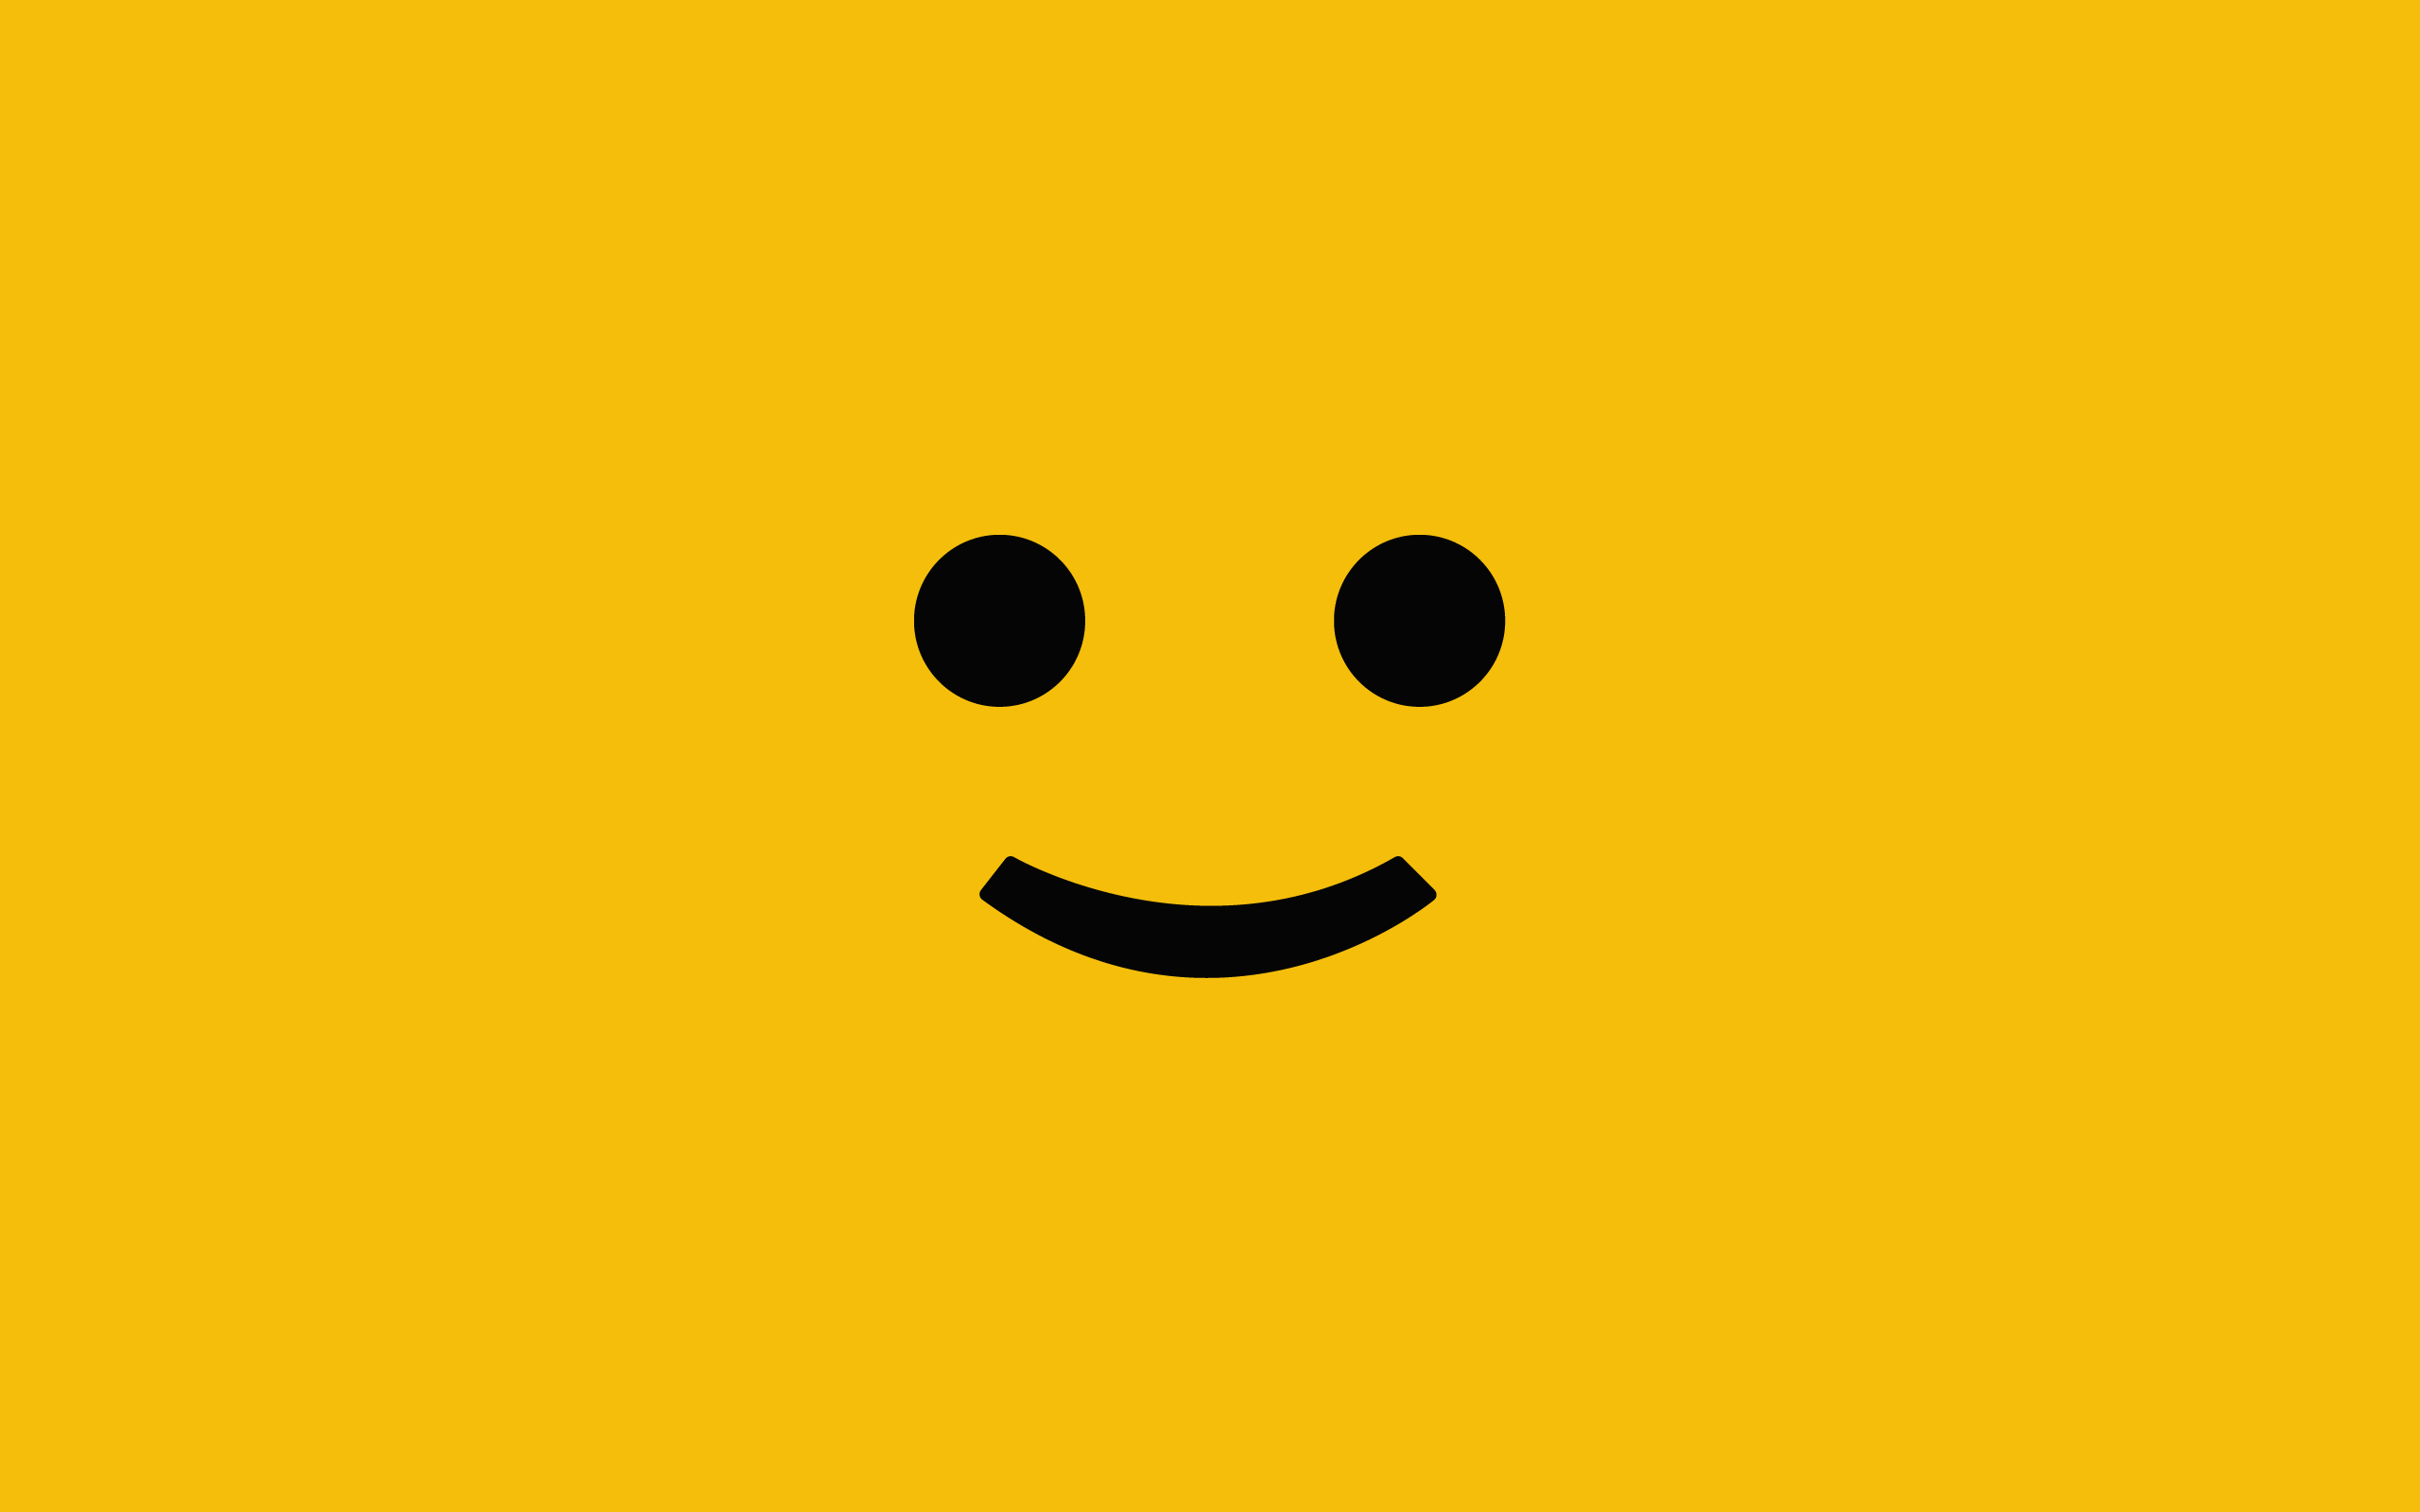 General 2560x1600 LEGO minimalism smiley yellow background yellow simple background toys